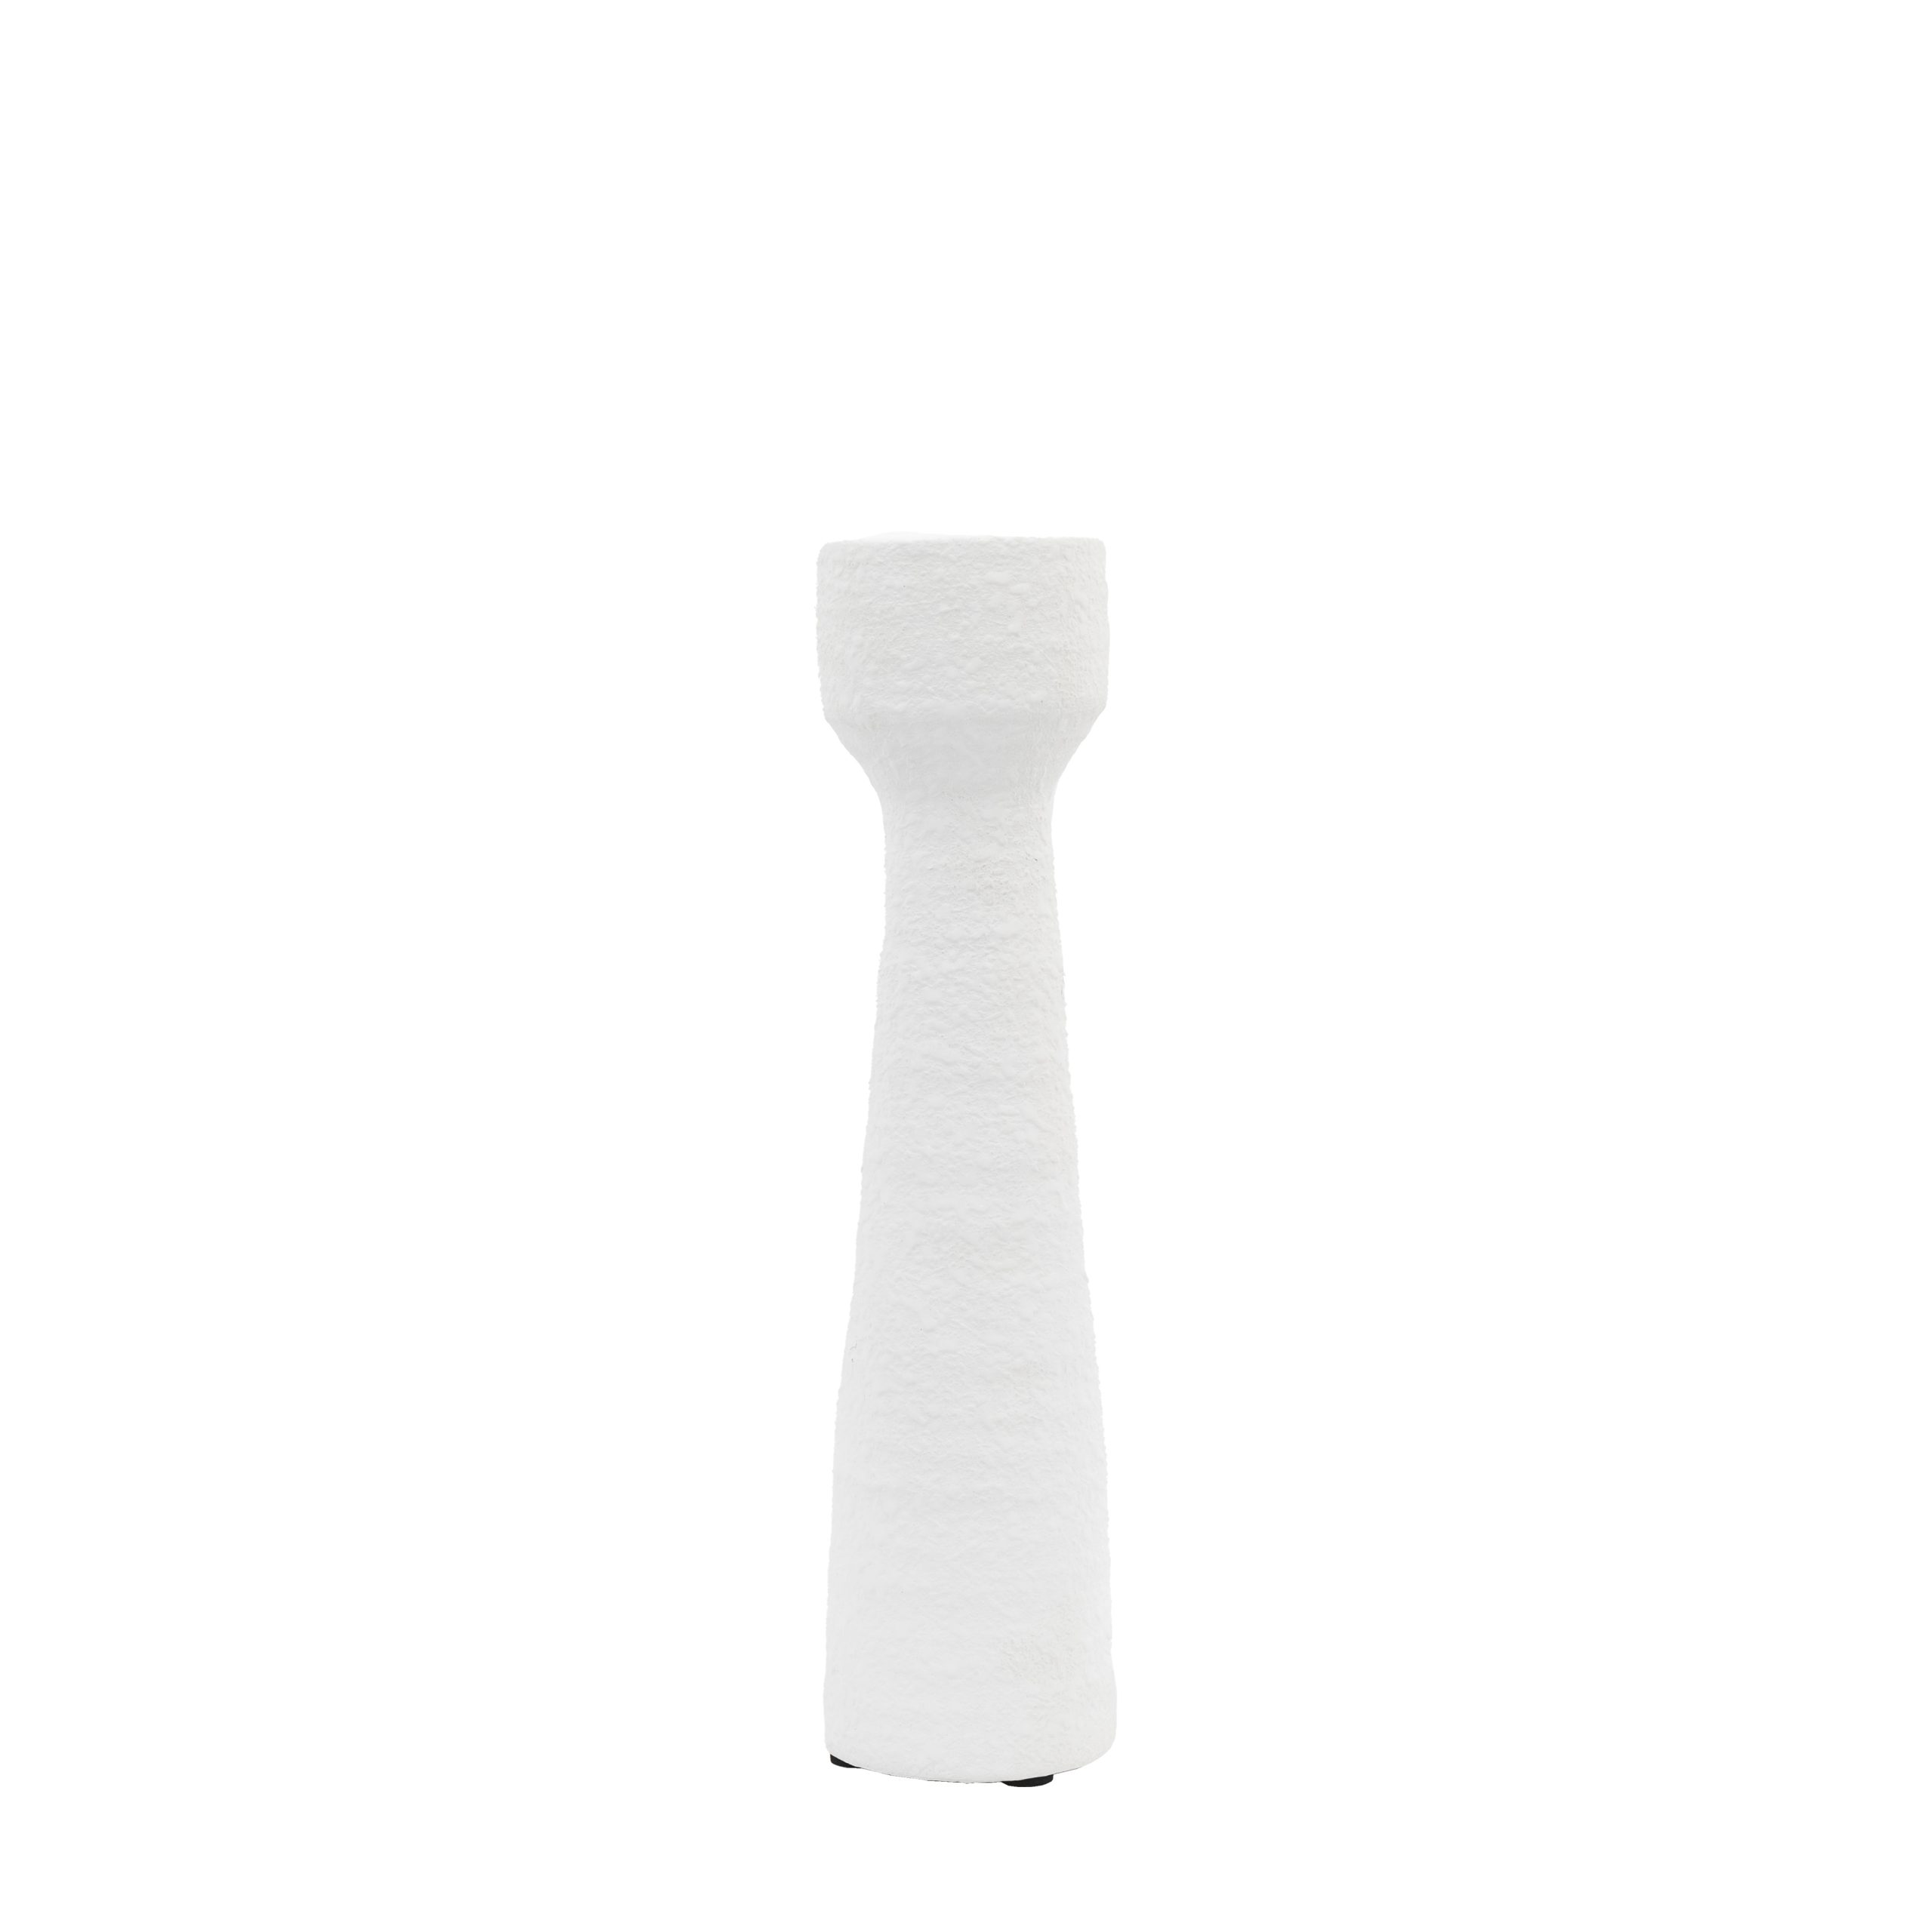 Gallery Direct Luna Candlestick Small White (S/2)